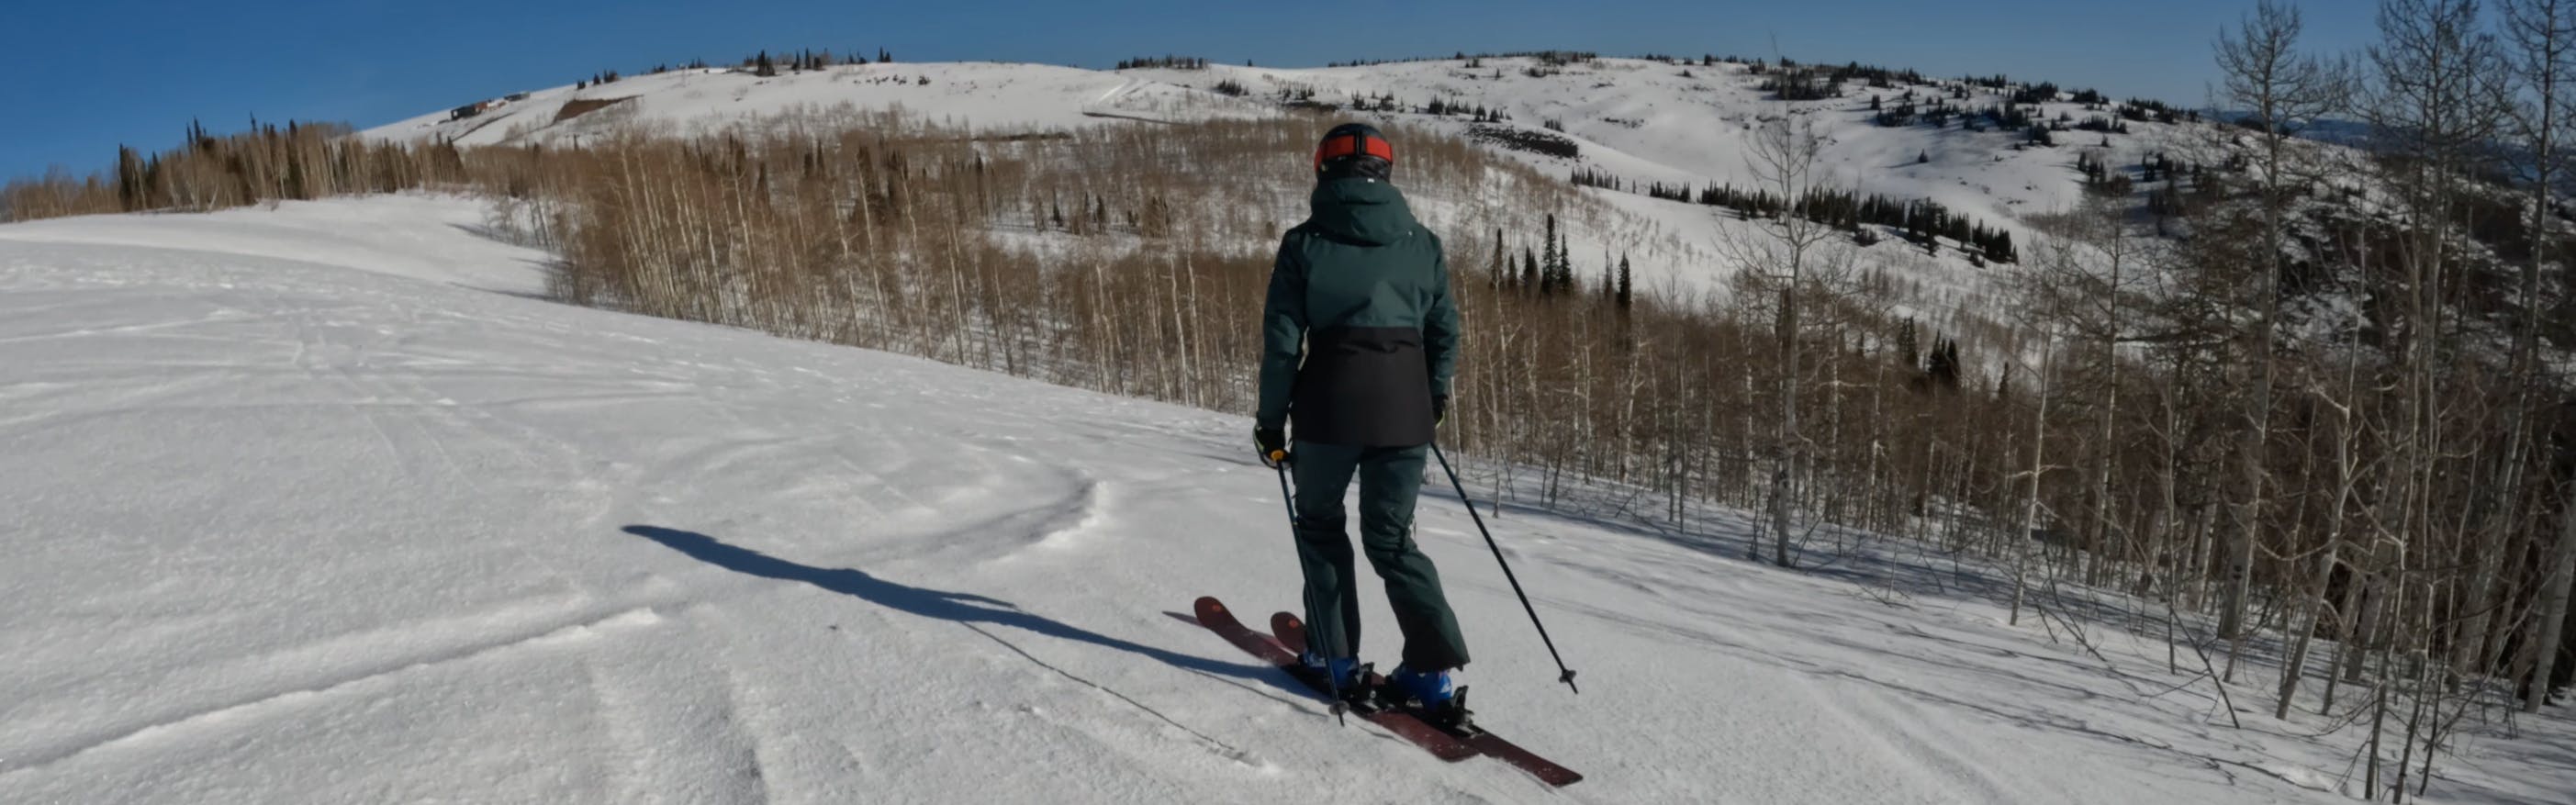 A skier on the 2023 Blizzard Black Pearl 97 Skis.